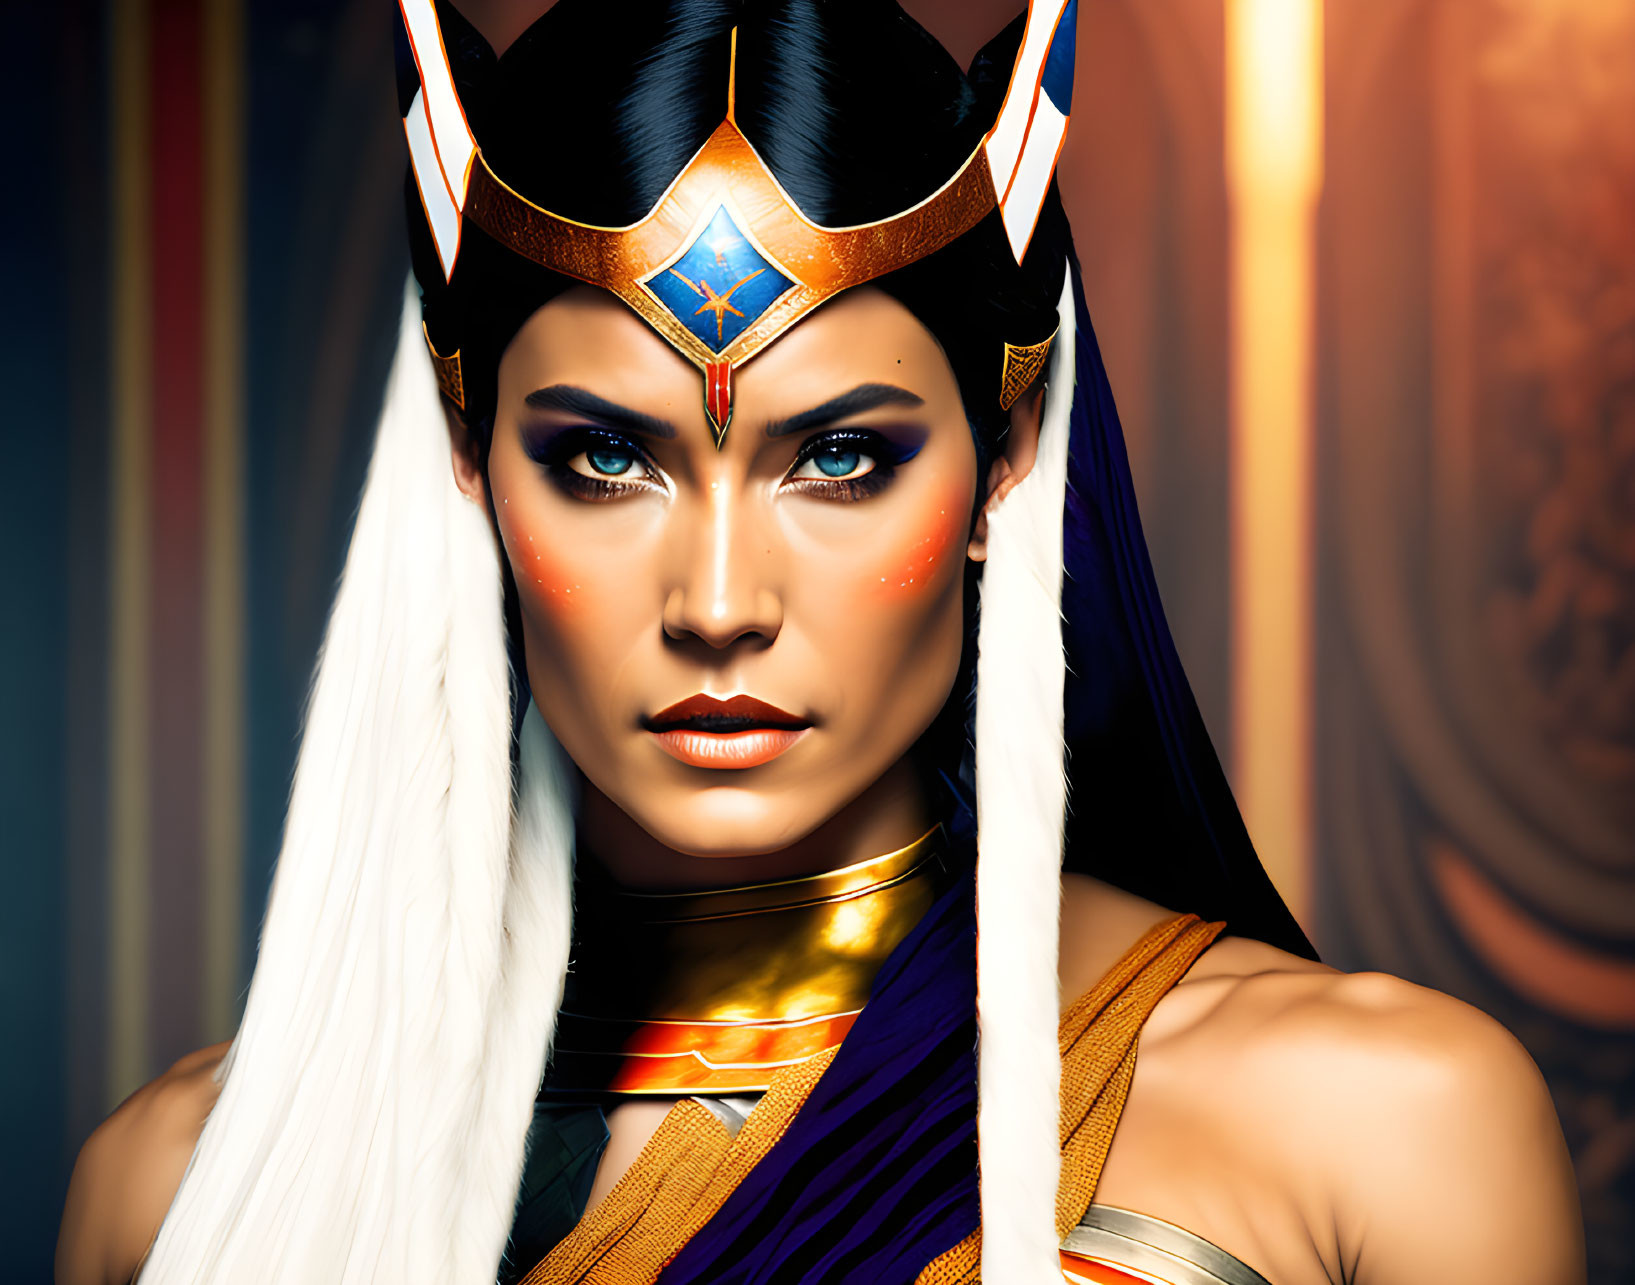 Portrait of Woman in Warrior Makeup and Attire